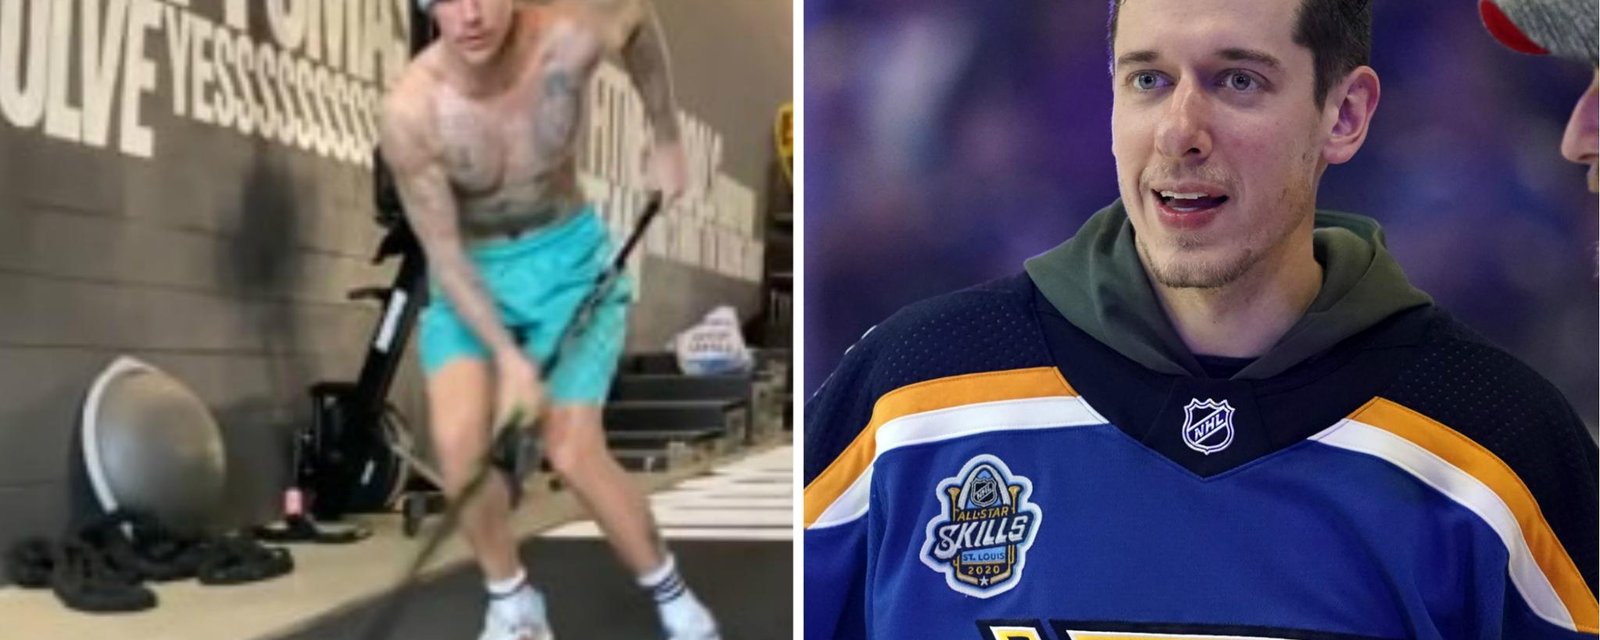 Justin Bieber taunts Binnington with new moves ahead of shootout challenge! 